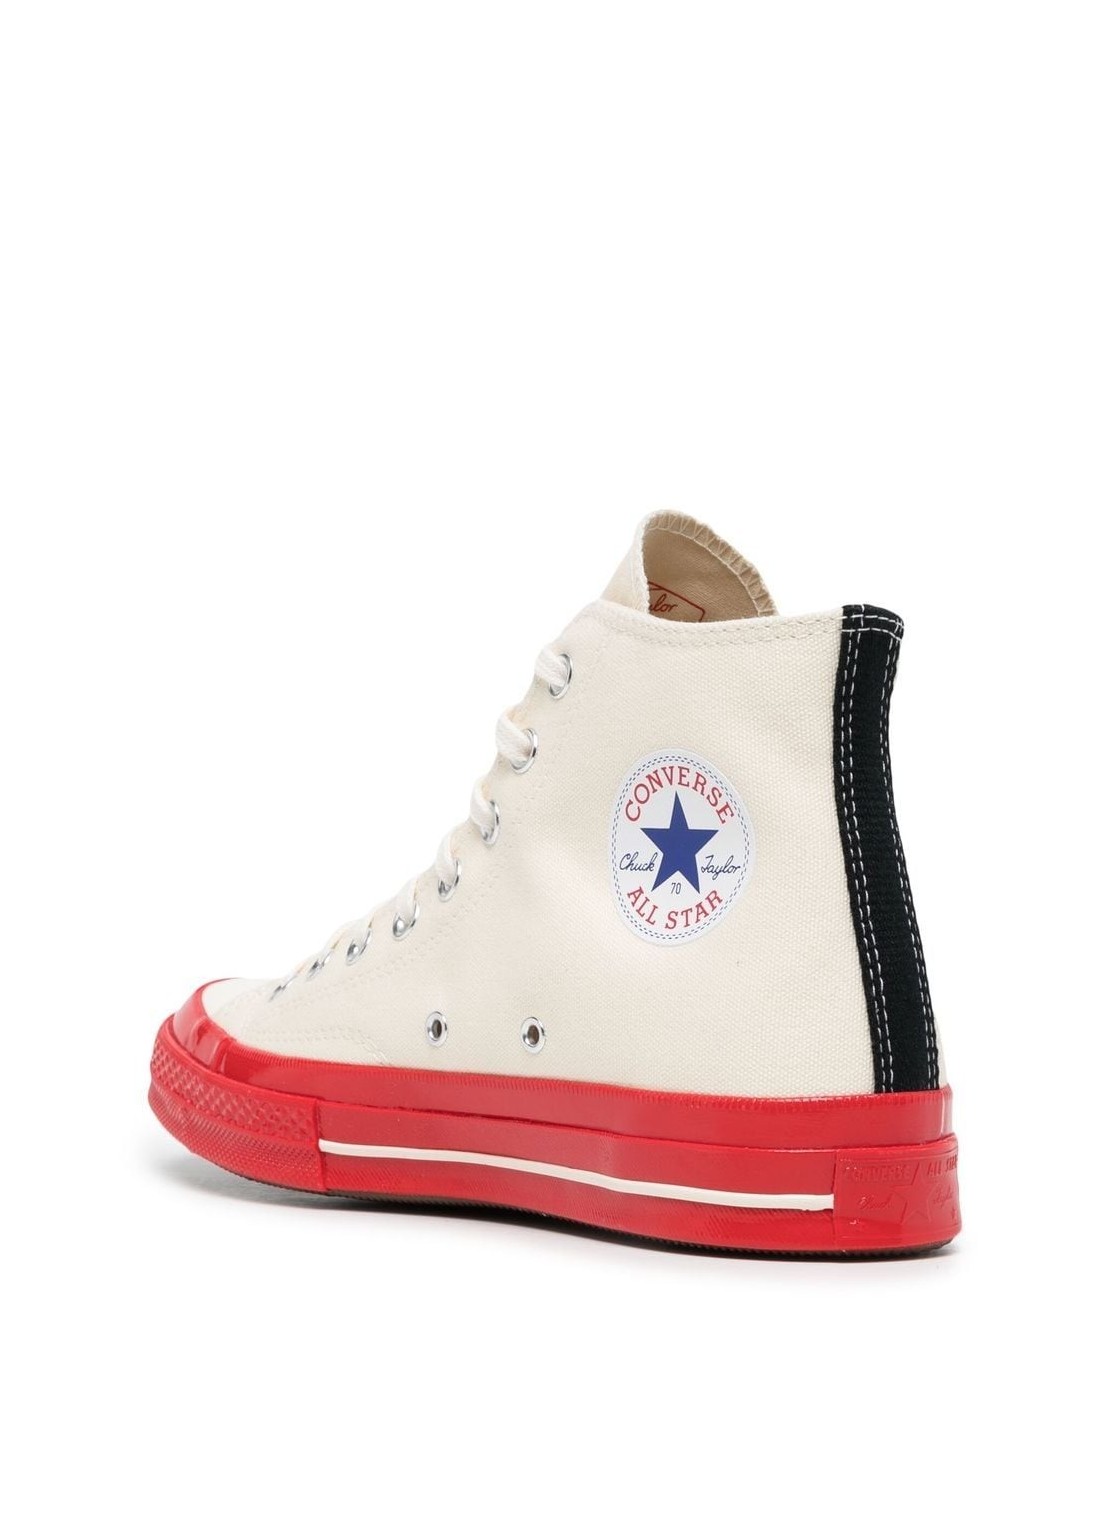 comme des garcons converse red sole high - p1k124 white Talla 35